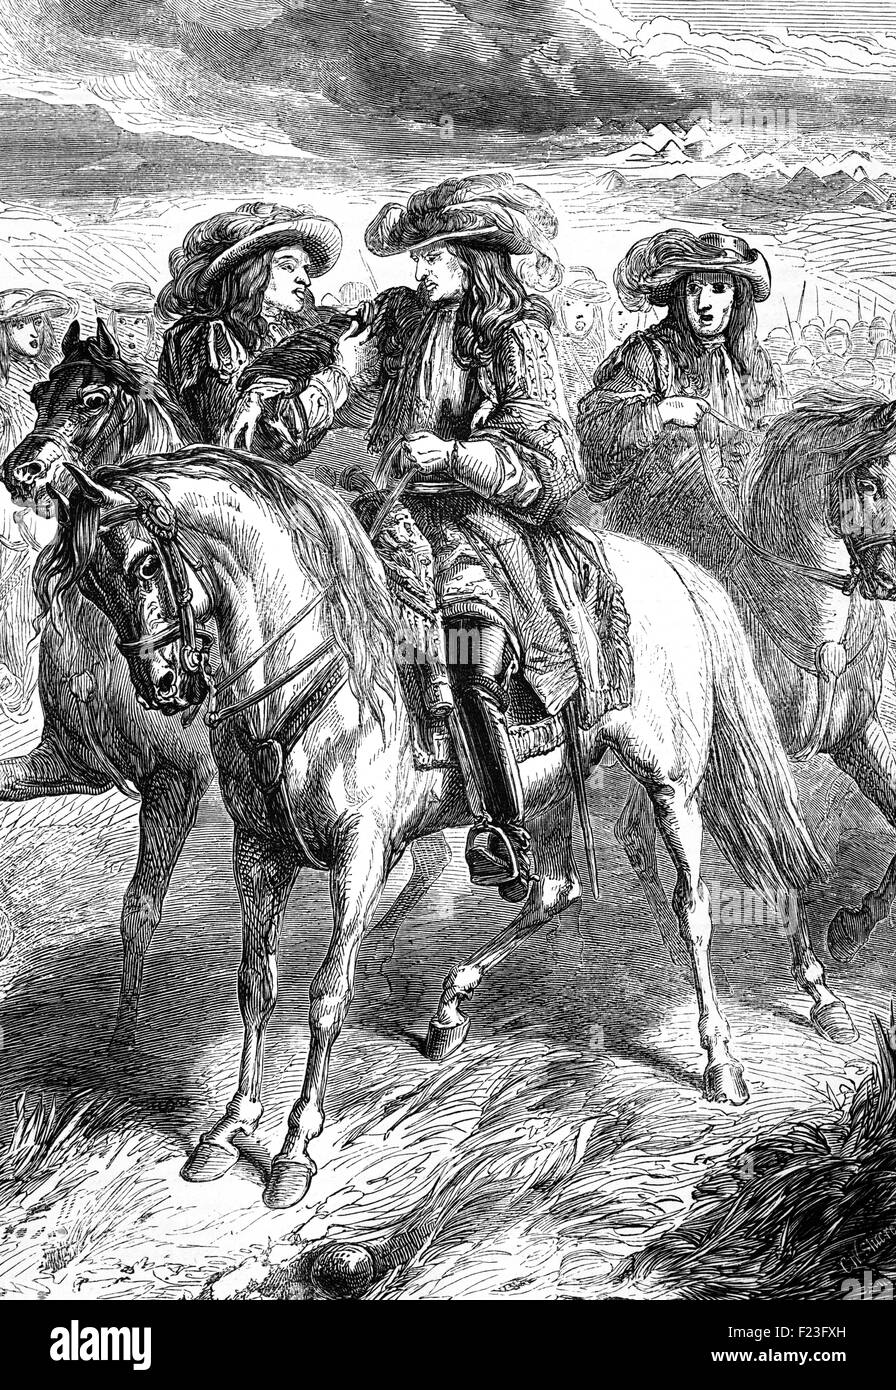 William III had a narrow escape when he was wounded in the shoulder by Jacobite artillery while surveying the fords over which his troops would cross the Boyne during the Battle of the Boyne that took place on 11 July 1690. Stock Photo